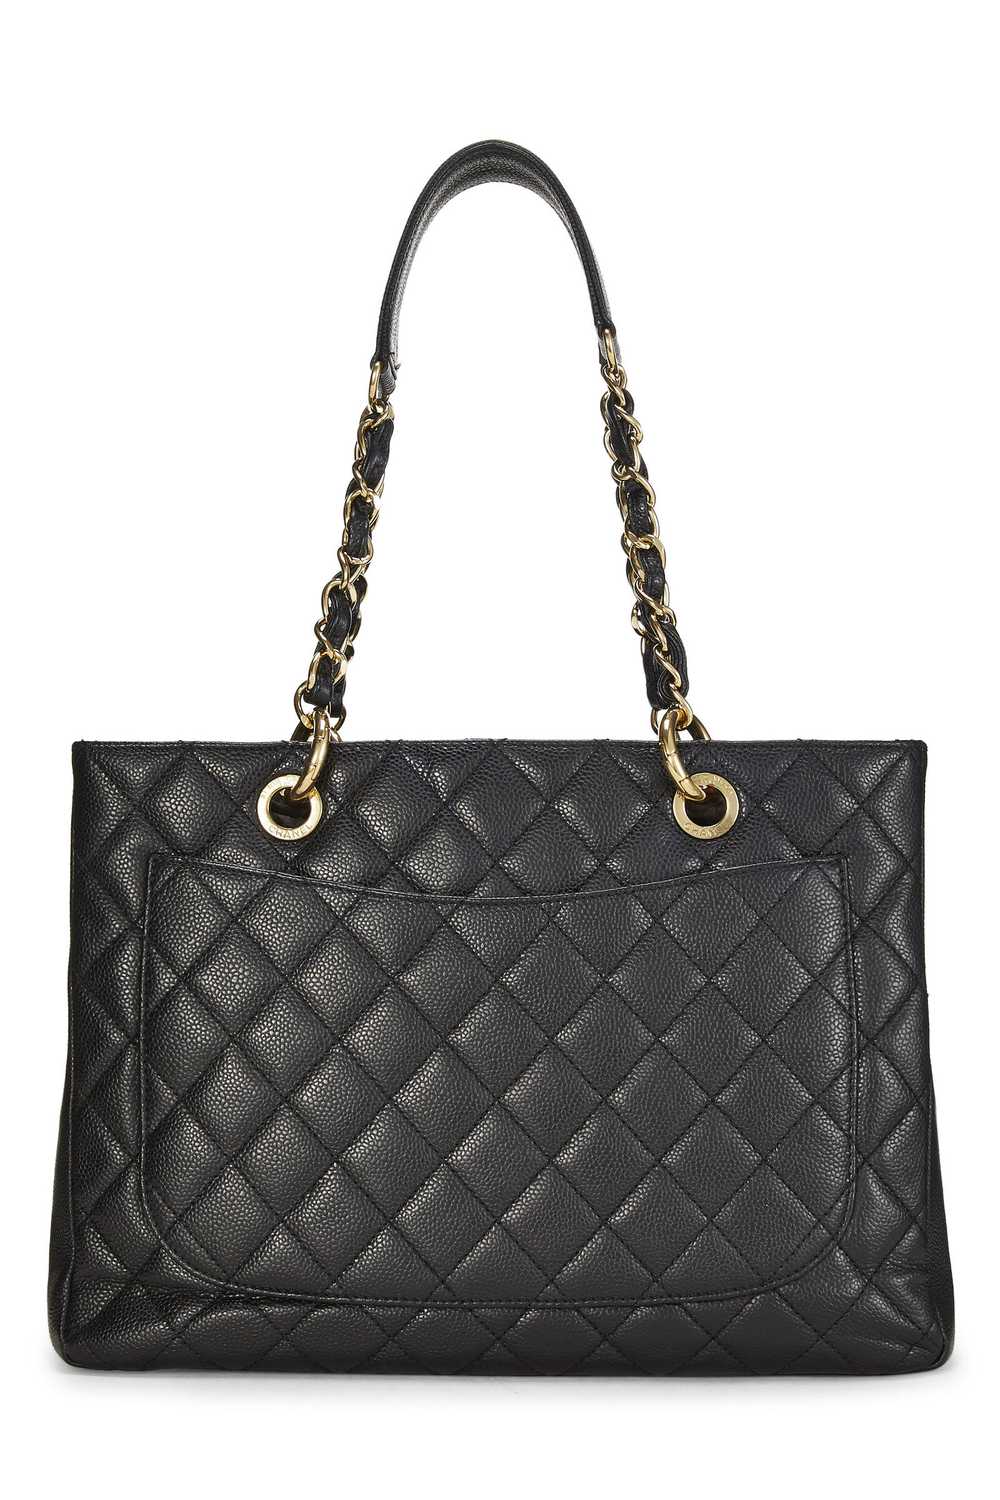 Black Quilted Caviar Grand Shopping Tote (GST) - image 4